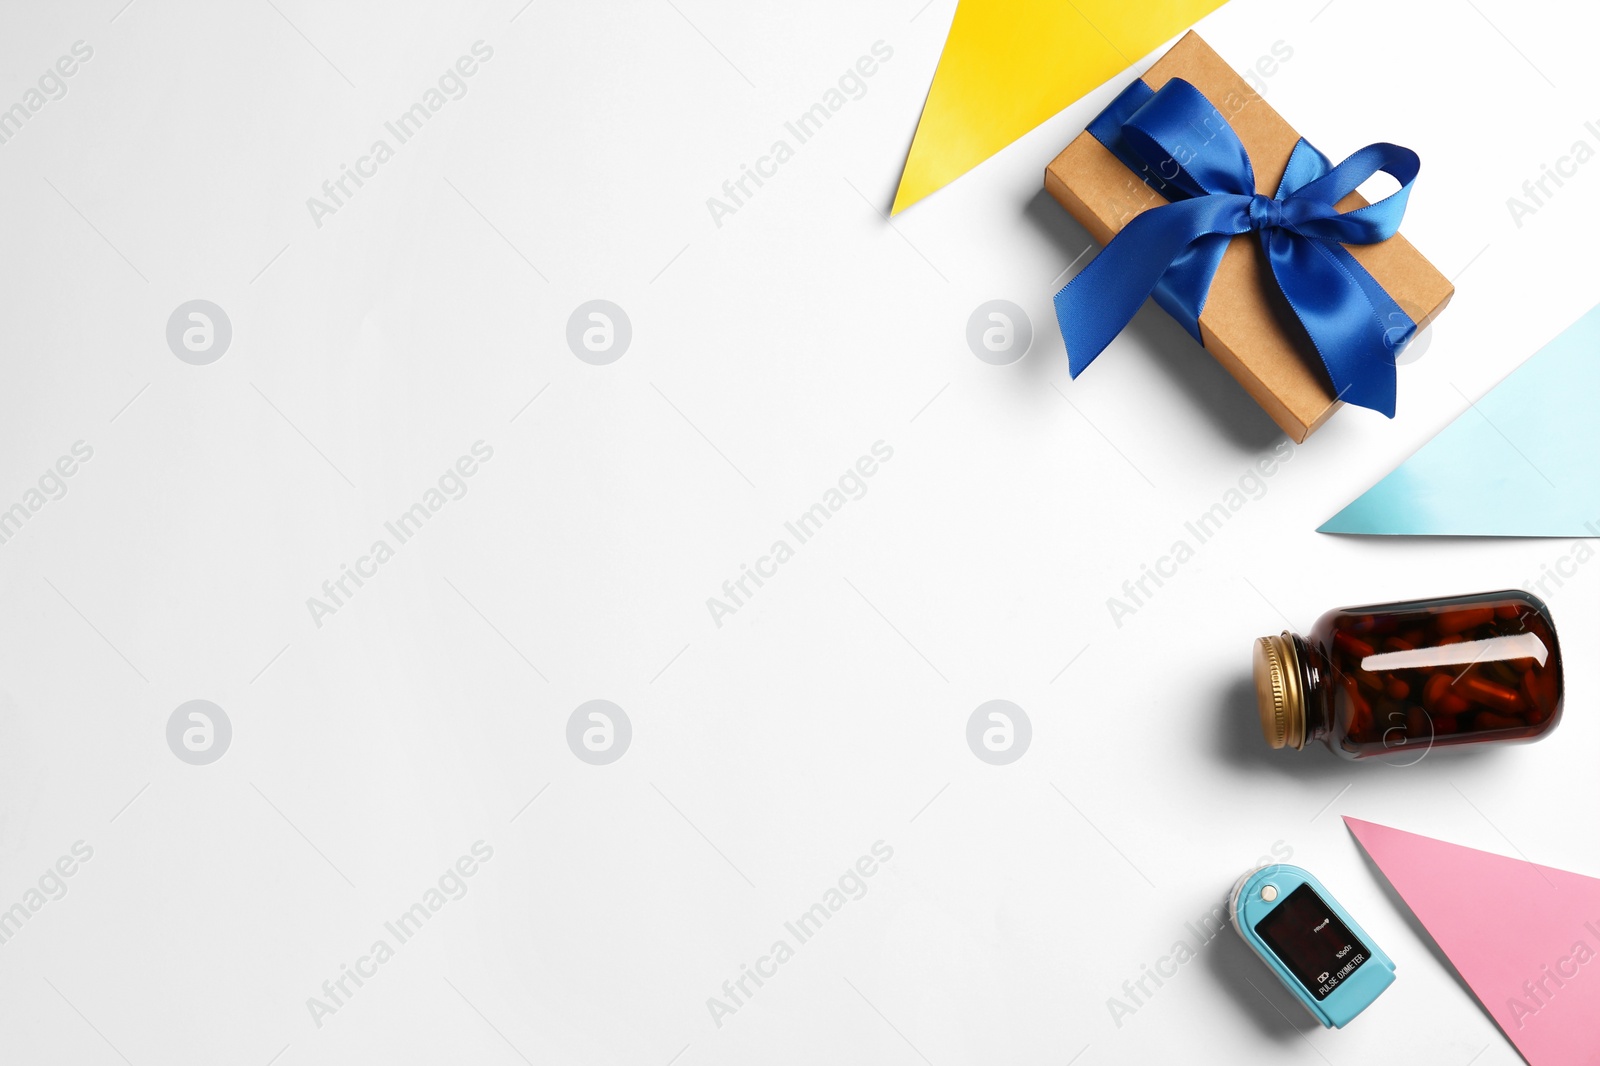 Photo of Fingertip pulse oximeter, bottle of pills and box on light background, flat lay with space for text. Medical gift